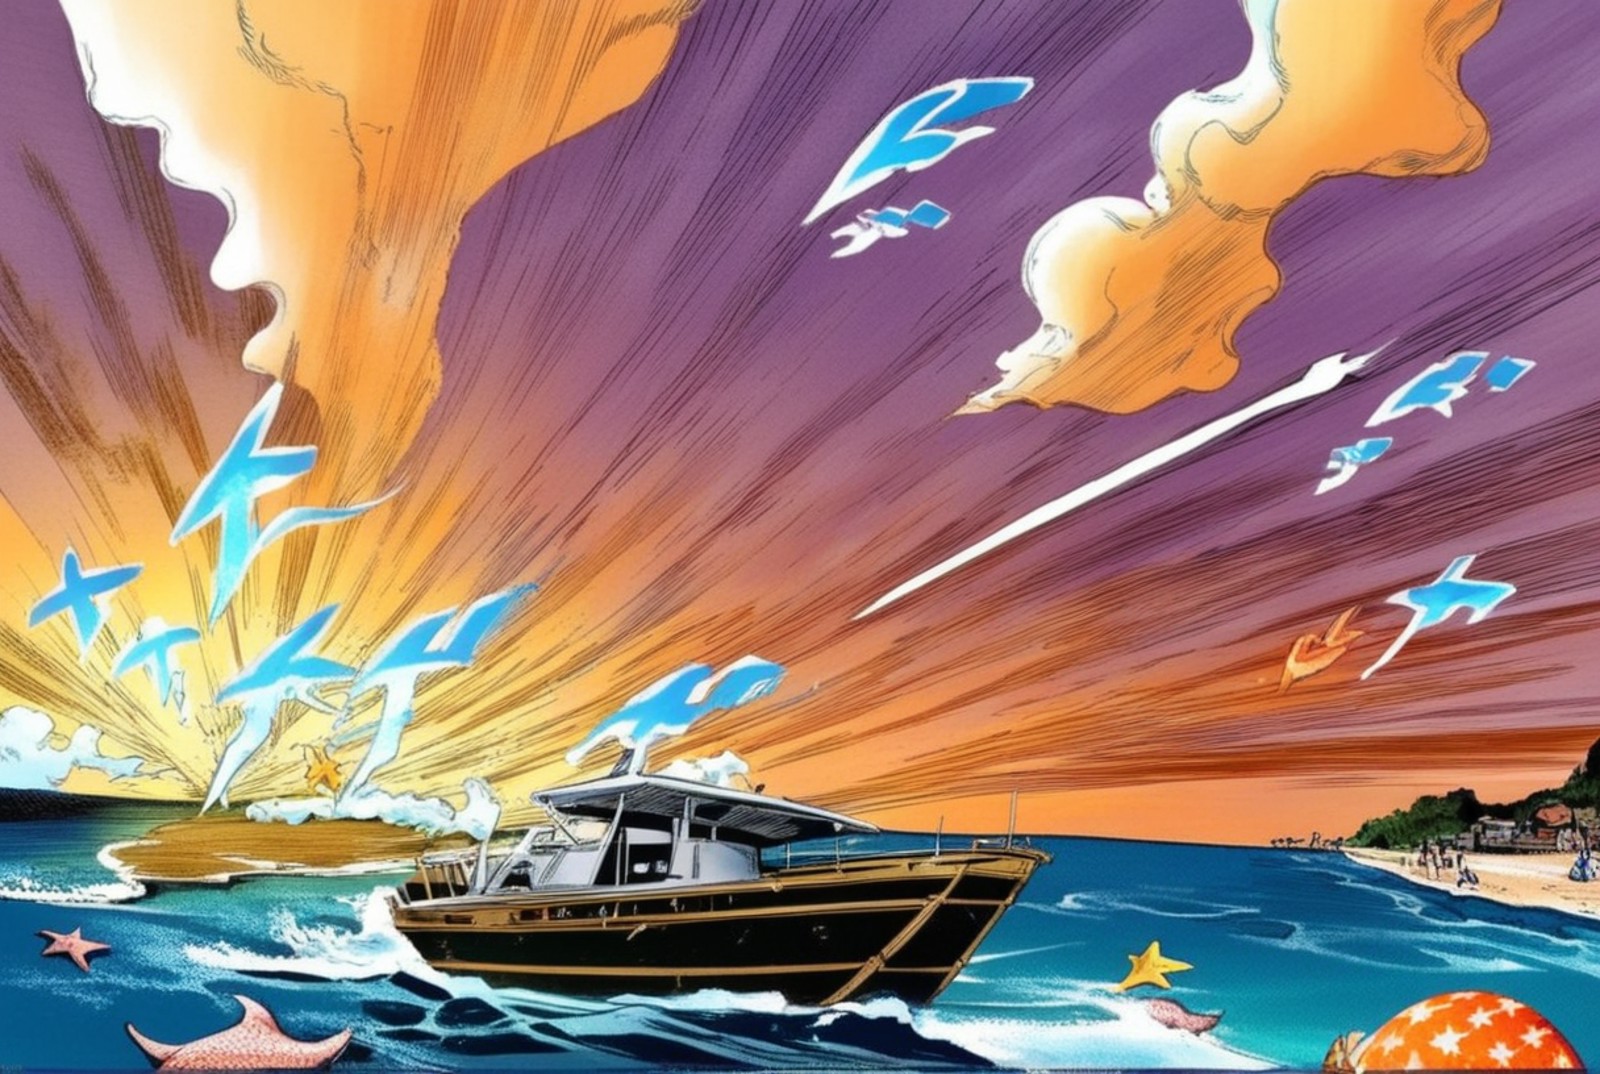 (old cartoon illustration) of
an old abandoned boat on the beach and surrounded by seagulls and starfish, storm and clouds...